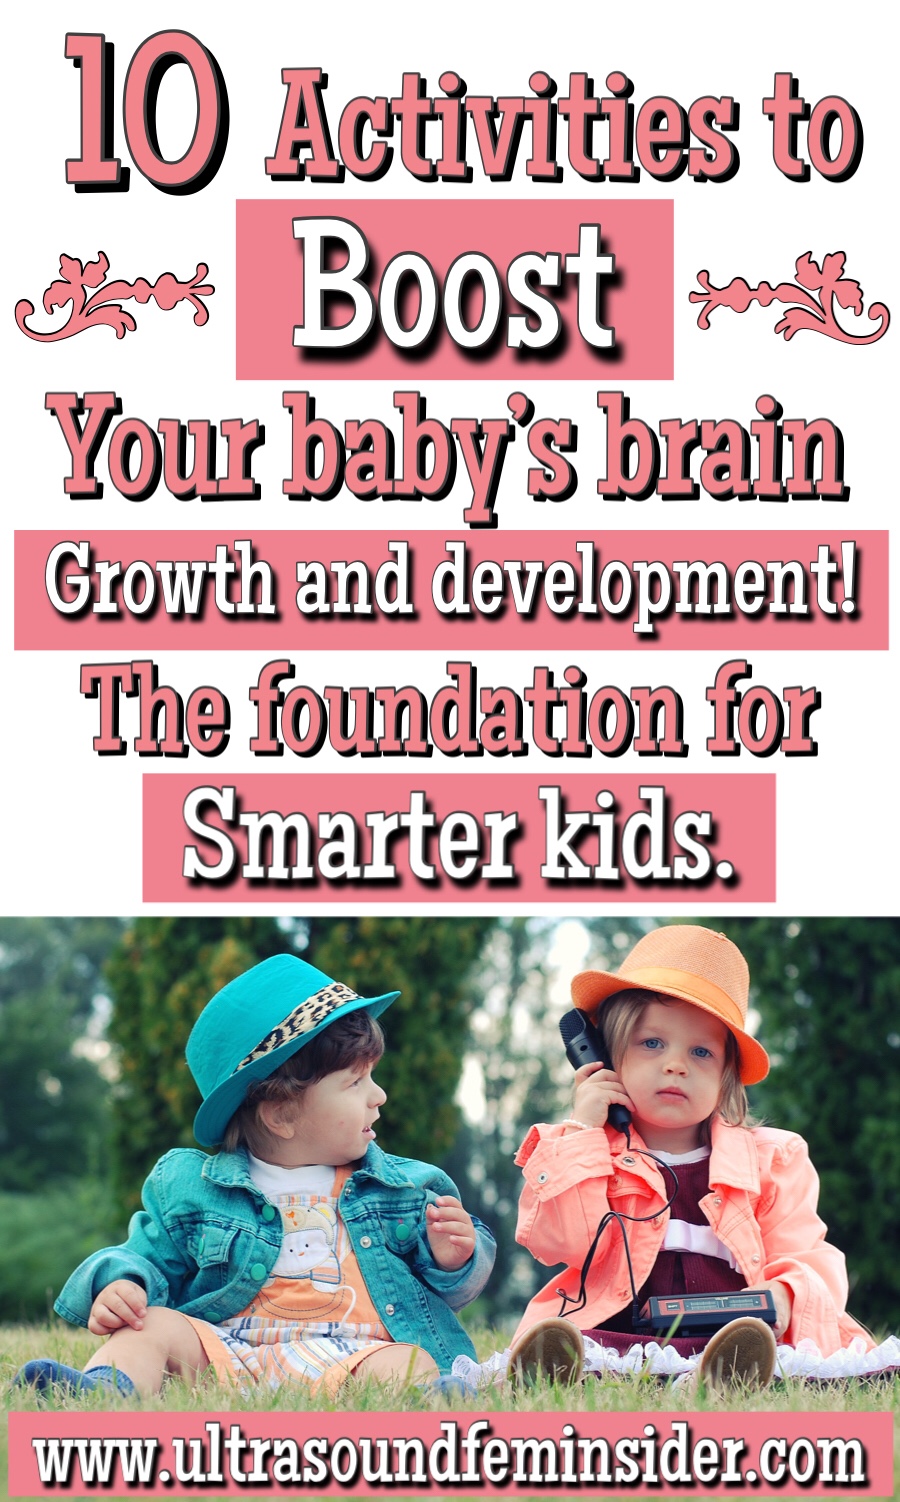 10 activities to boost your baby’s brain growth and development. 